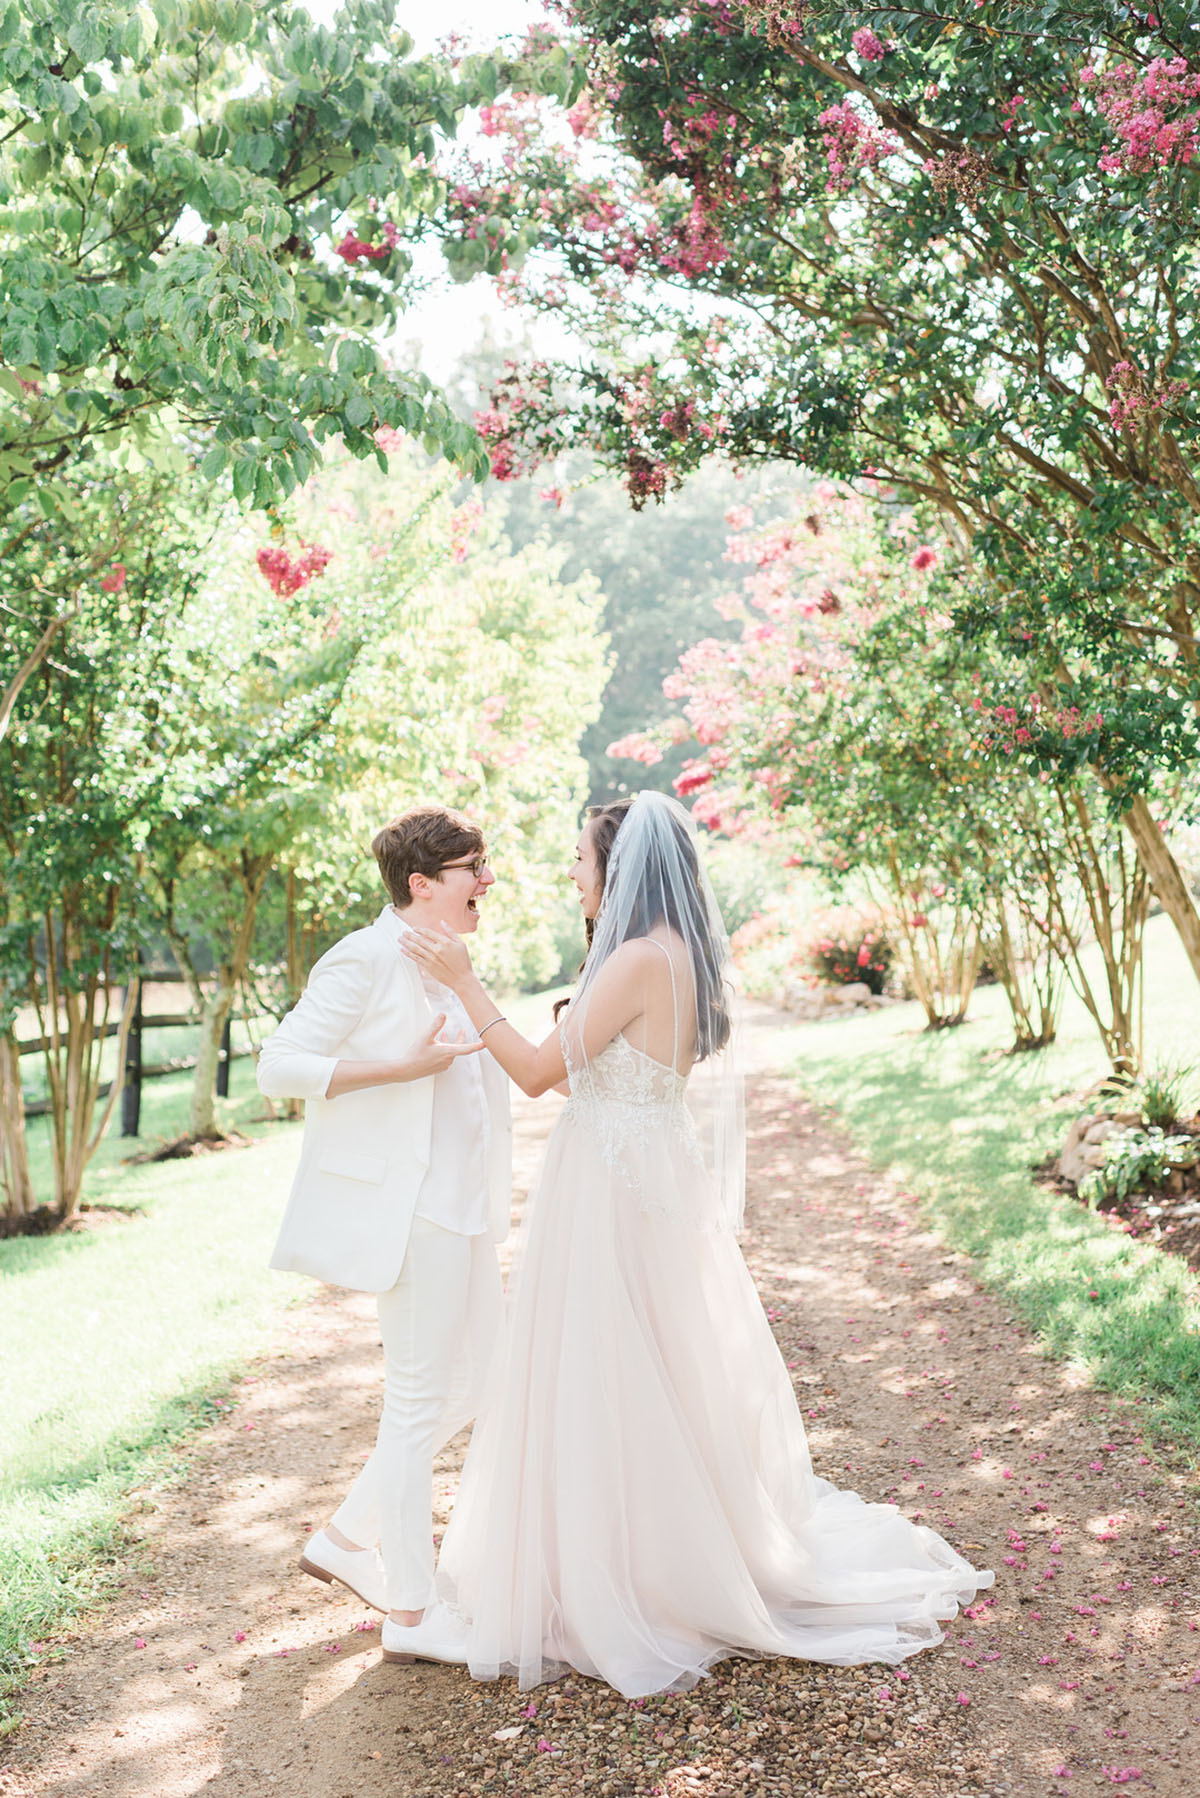 Storybrook Farm wedding in Jonesborough, Tennessee two brides blush dress all white suit first look